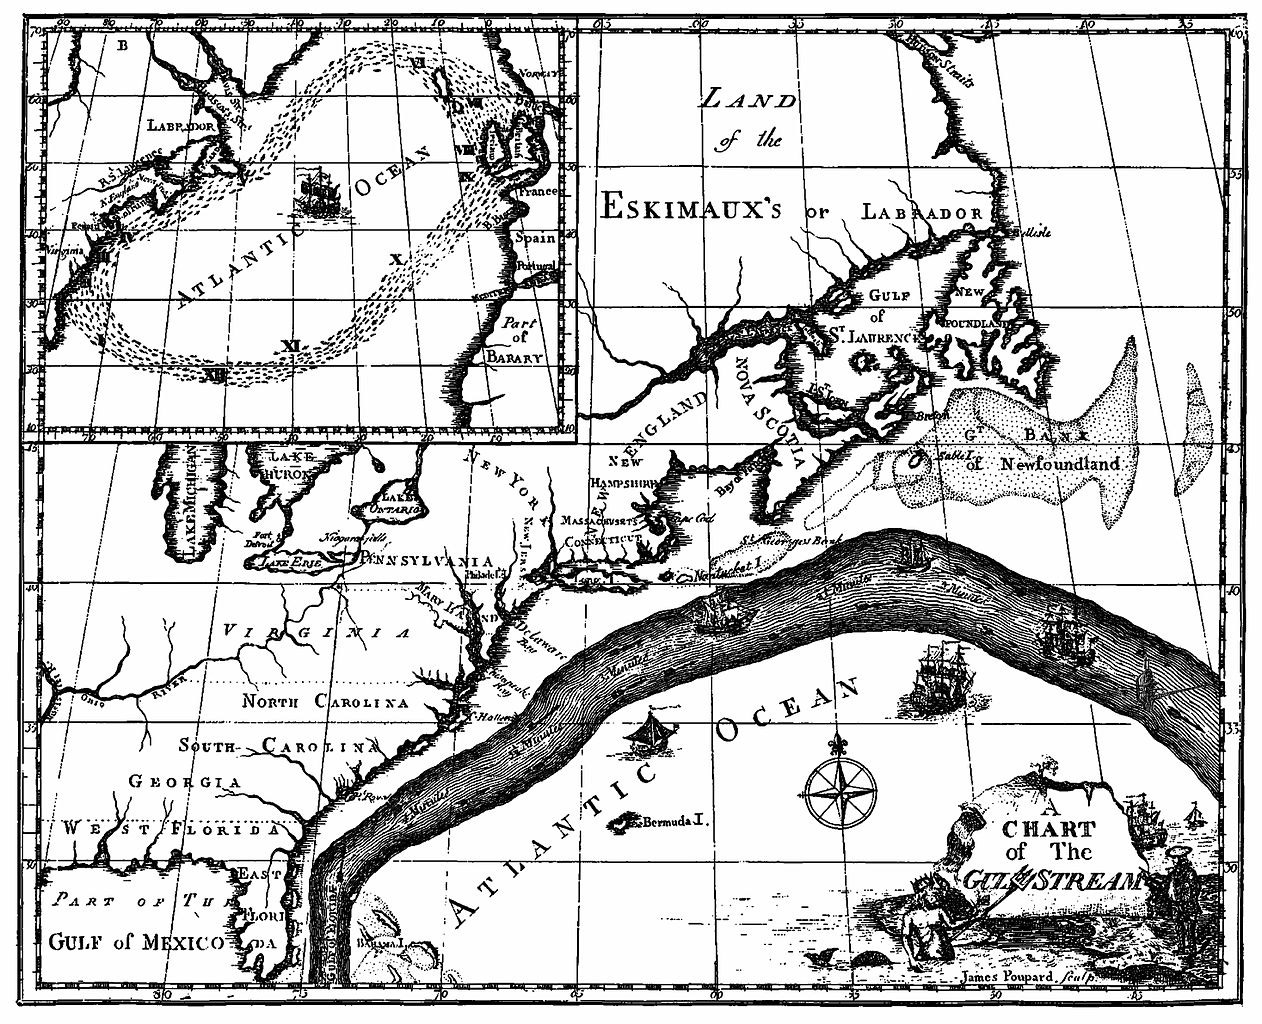 This map of the Gulf Stream appears in the book by Benjamin Franklin and dates from 1769. The Gulf Stream is depicted as the dark gray swath that runs along the east coast of what is now the United States.